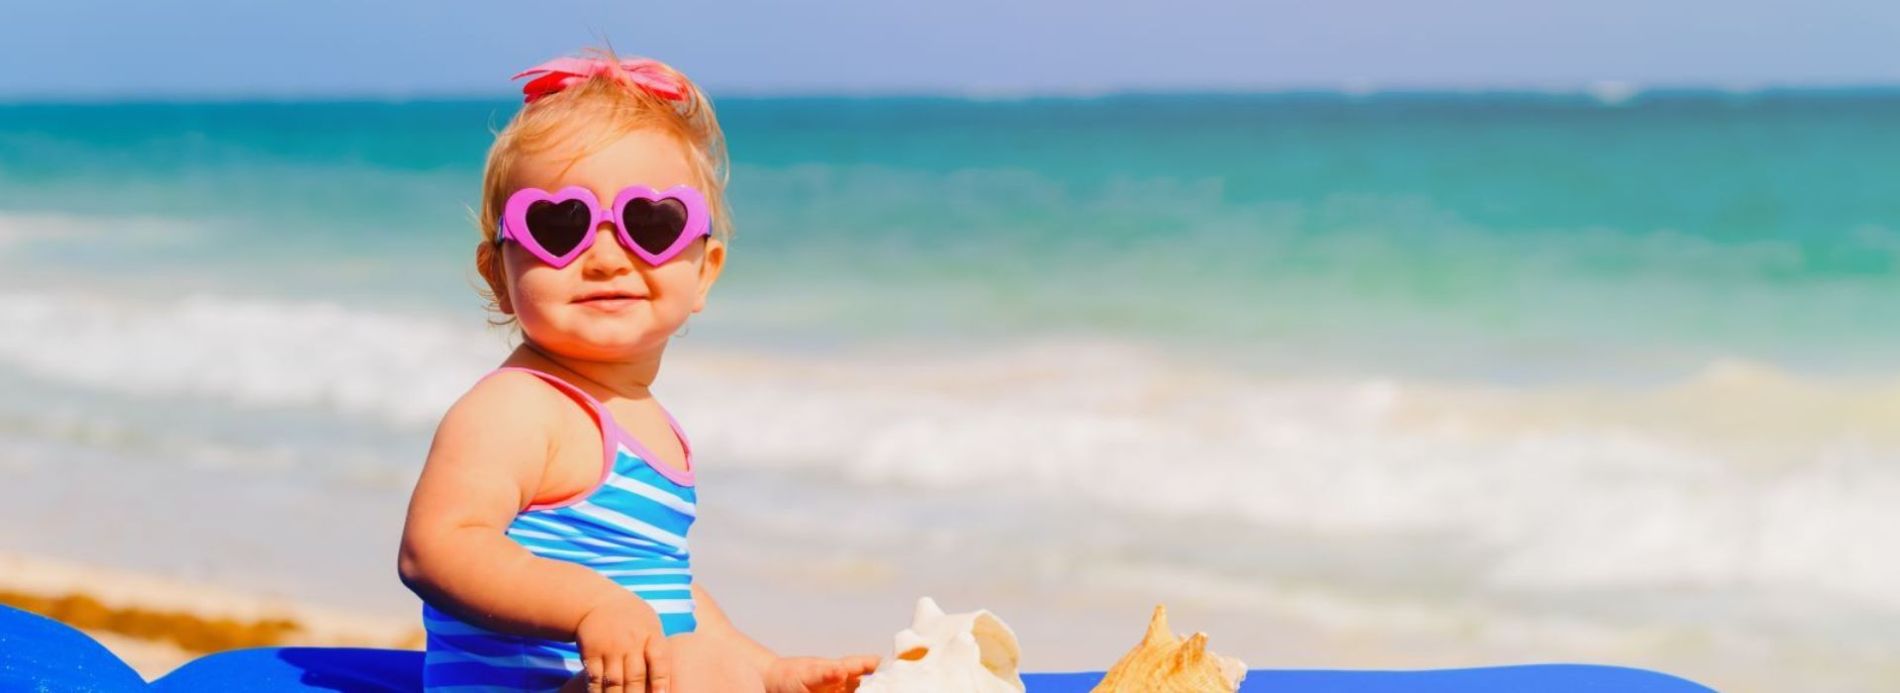 baby with sunglasses on beach